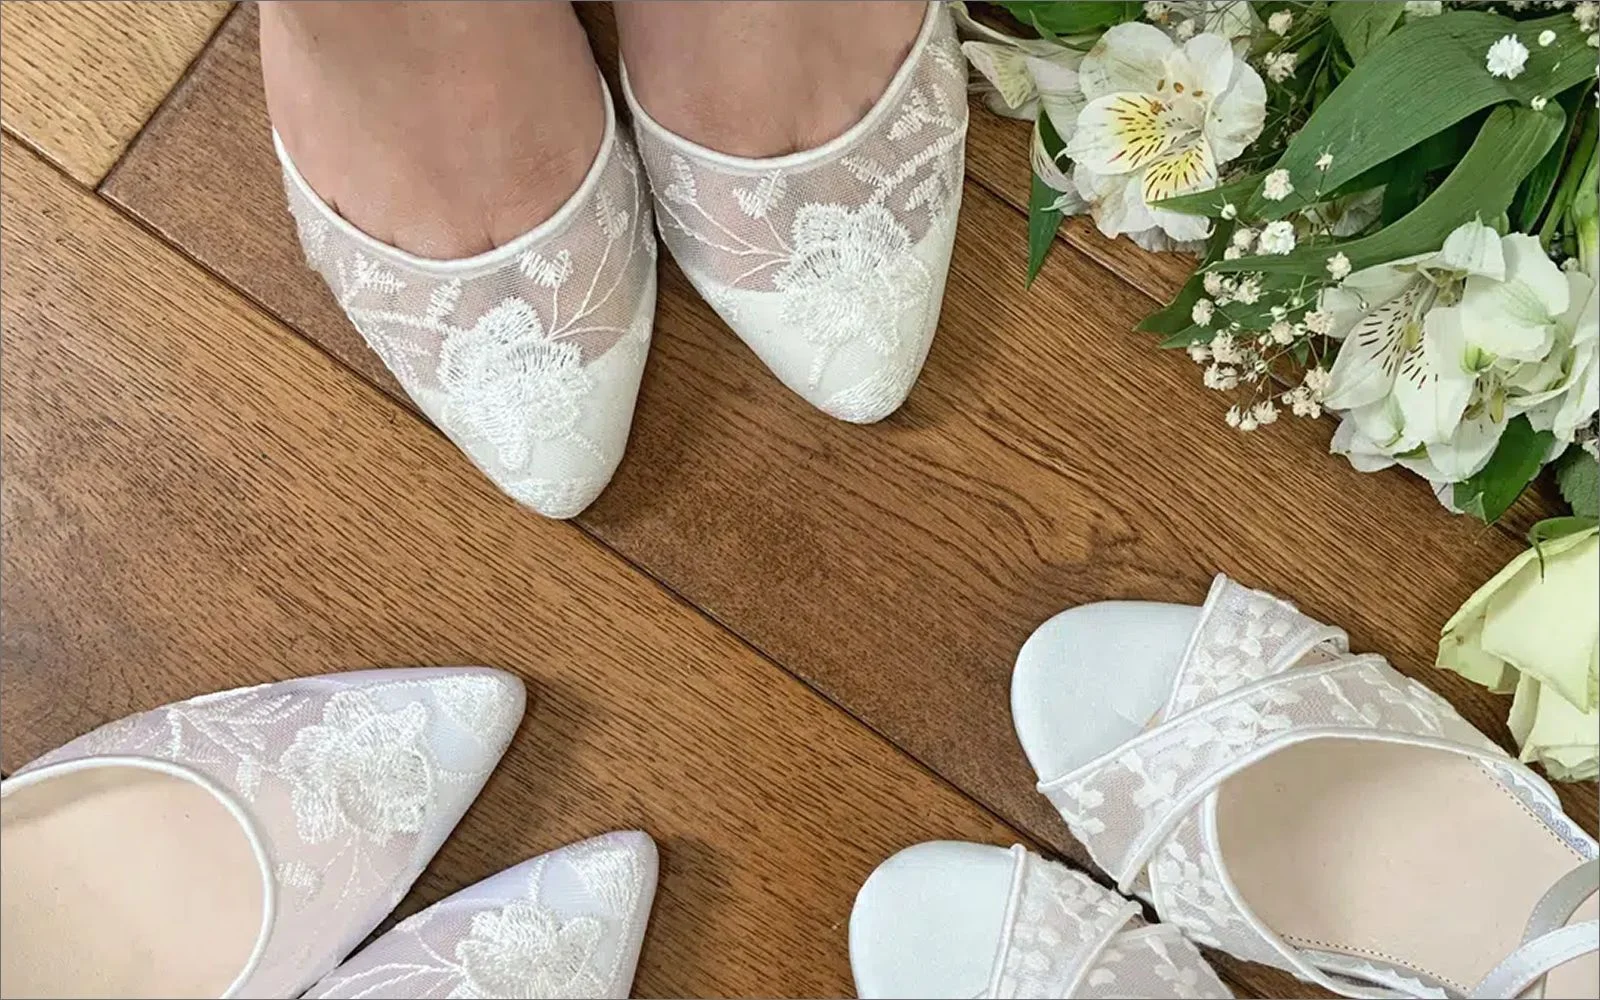 Best Local Brands To Buy Your Bridal Shoes From!